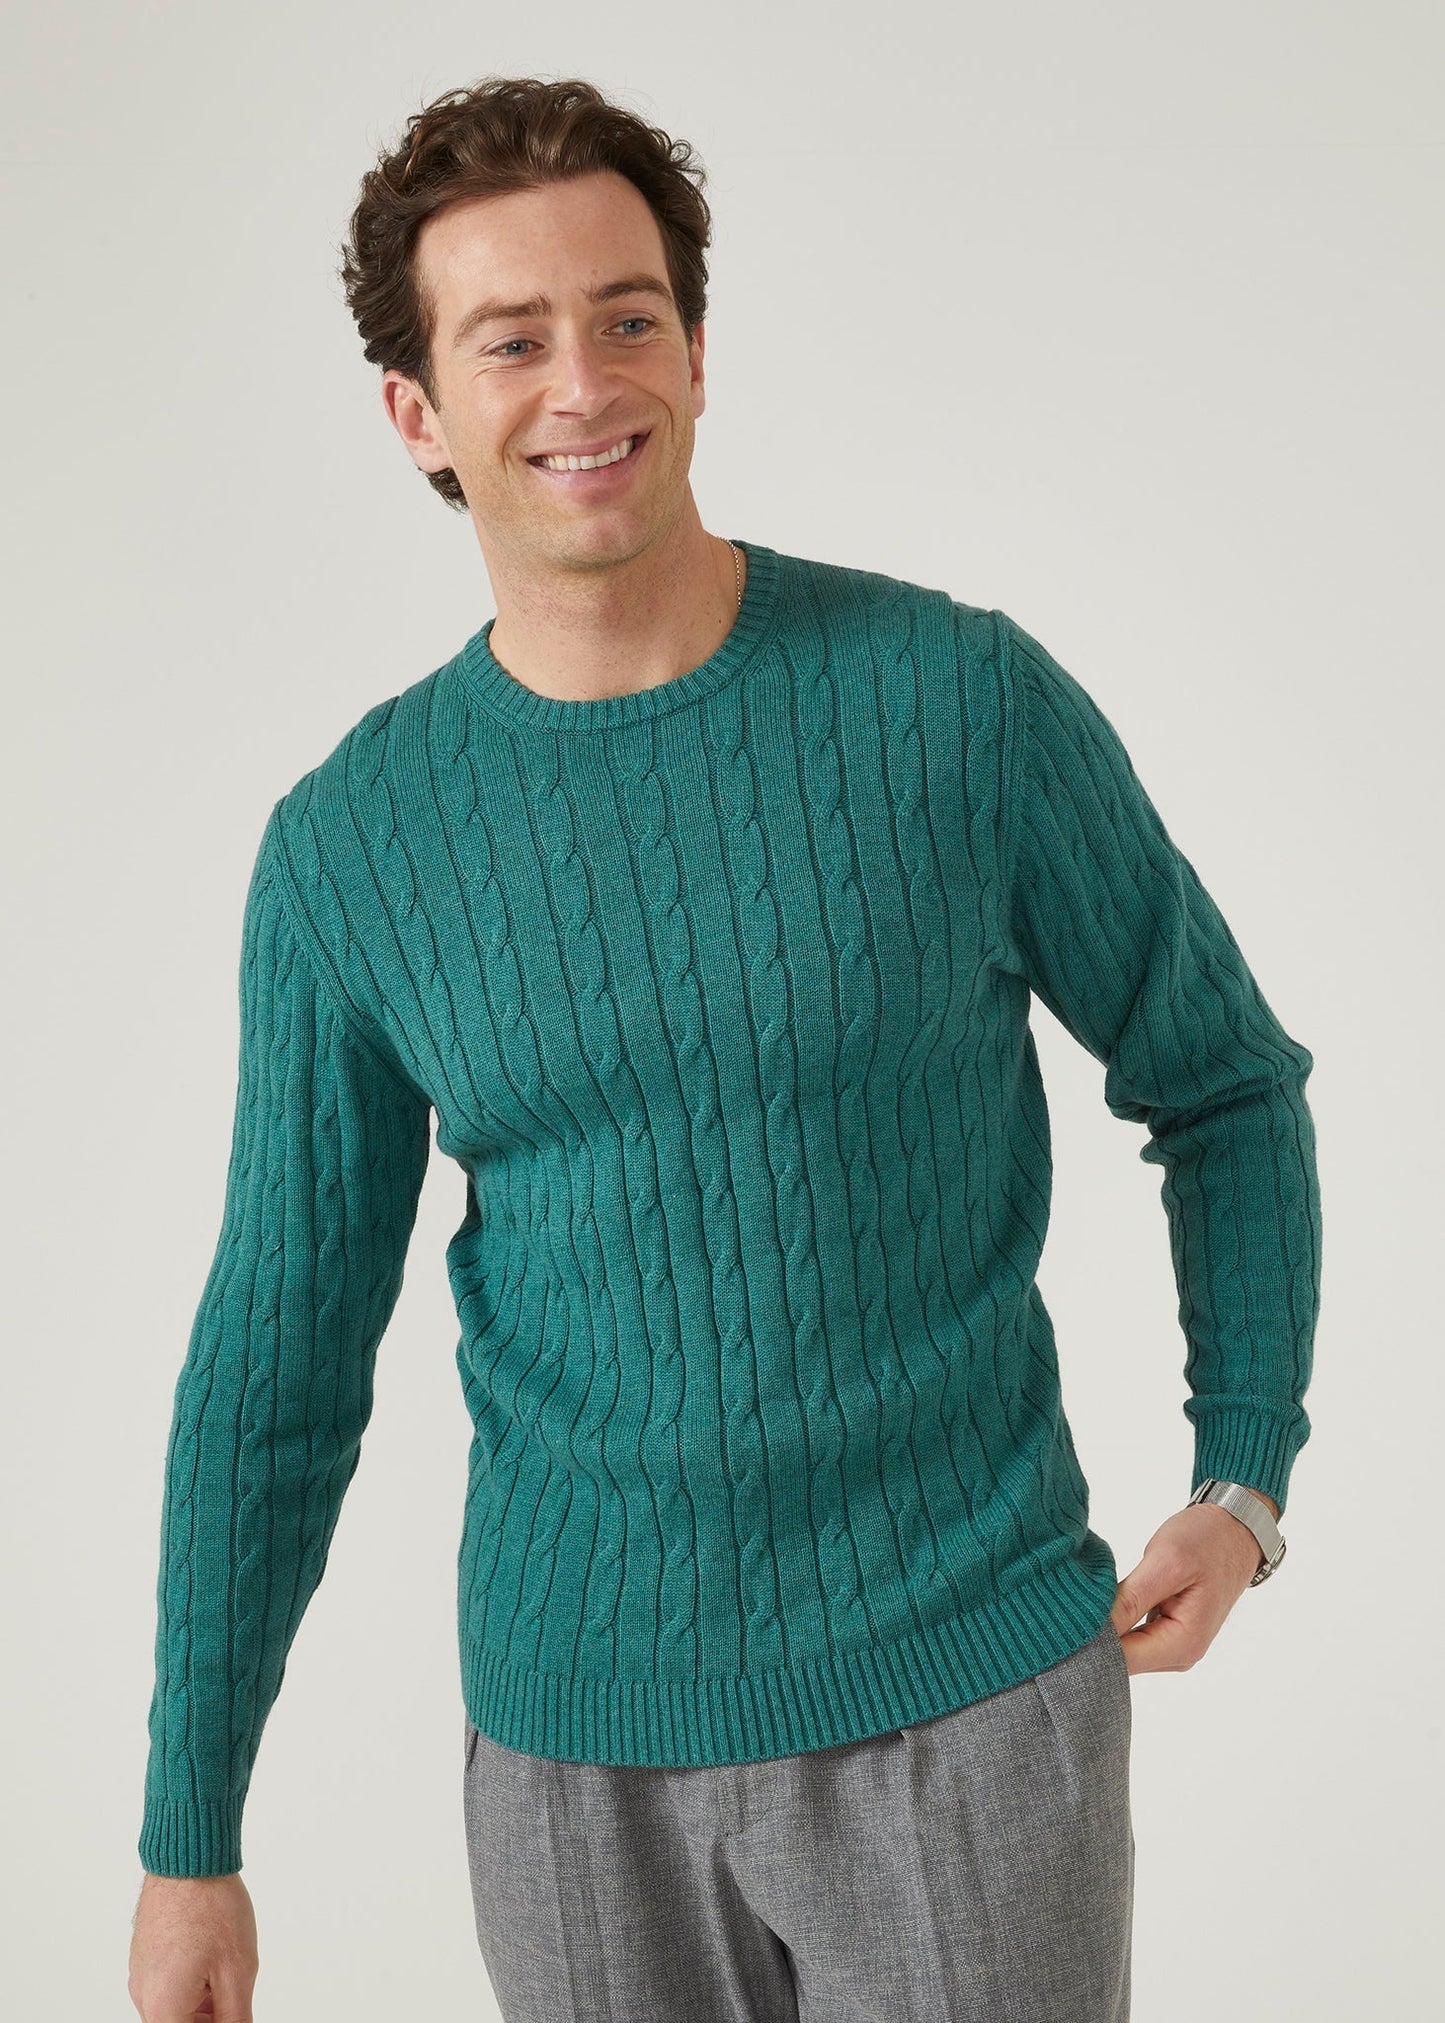 cotton cashmere jumper in moorland green with a crew neck design.